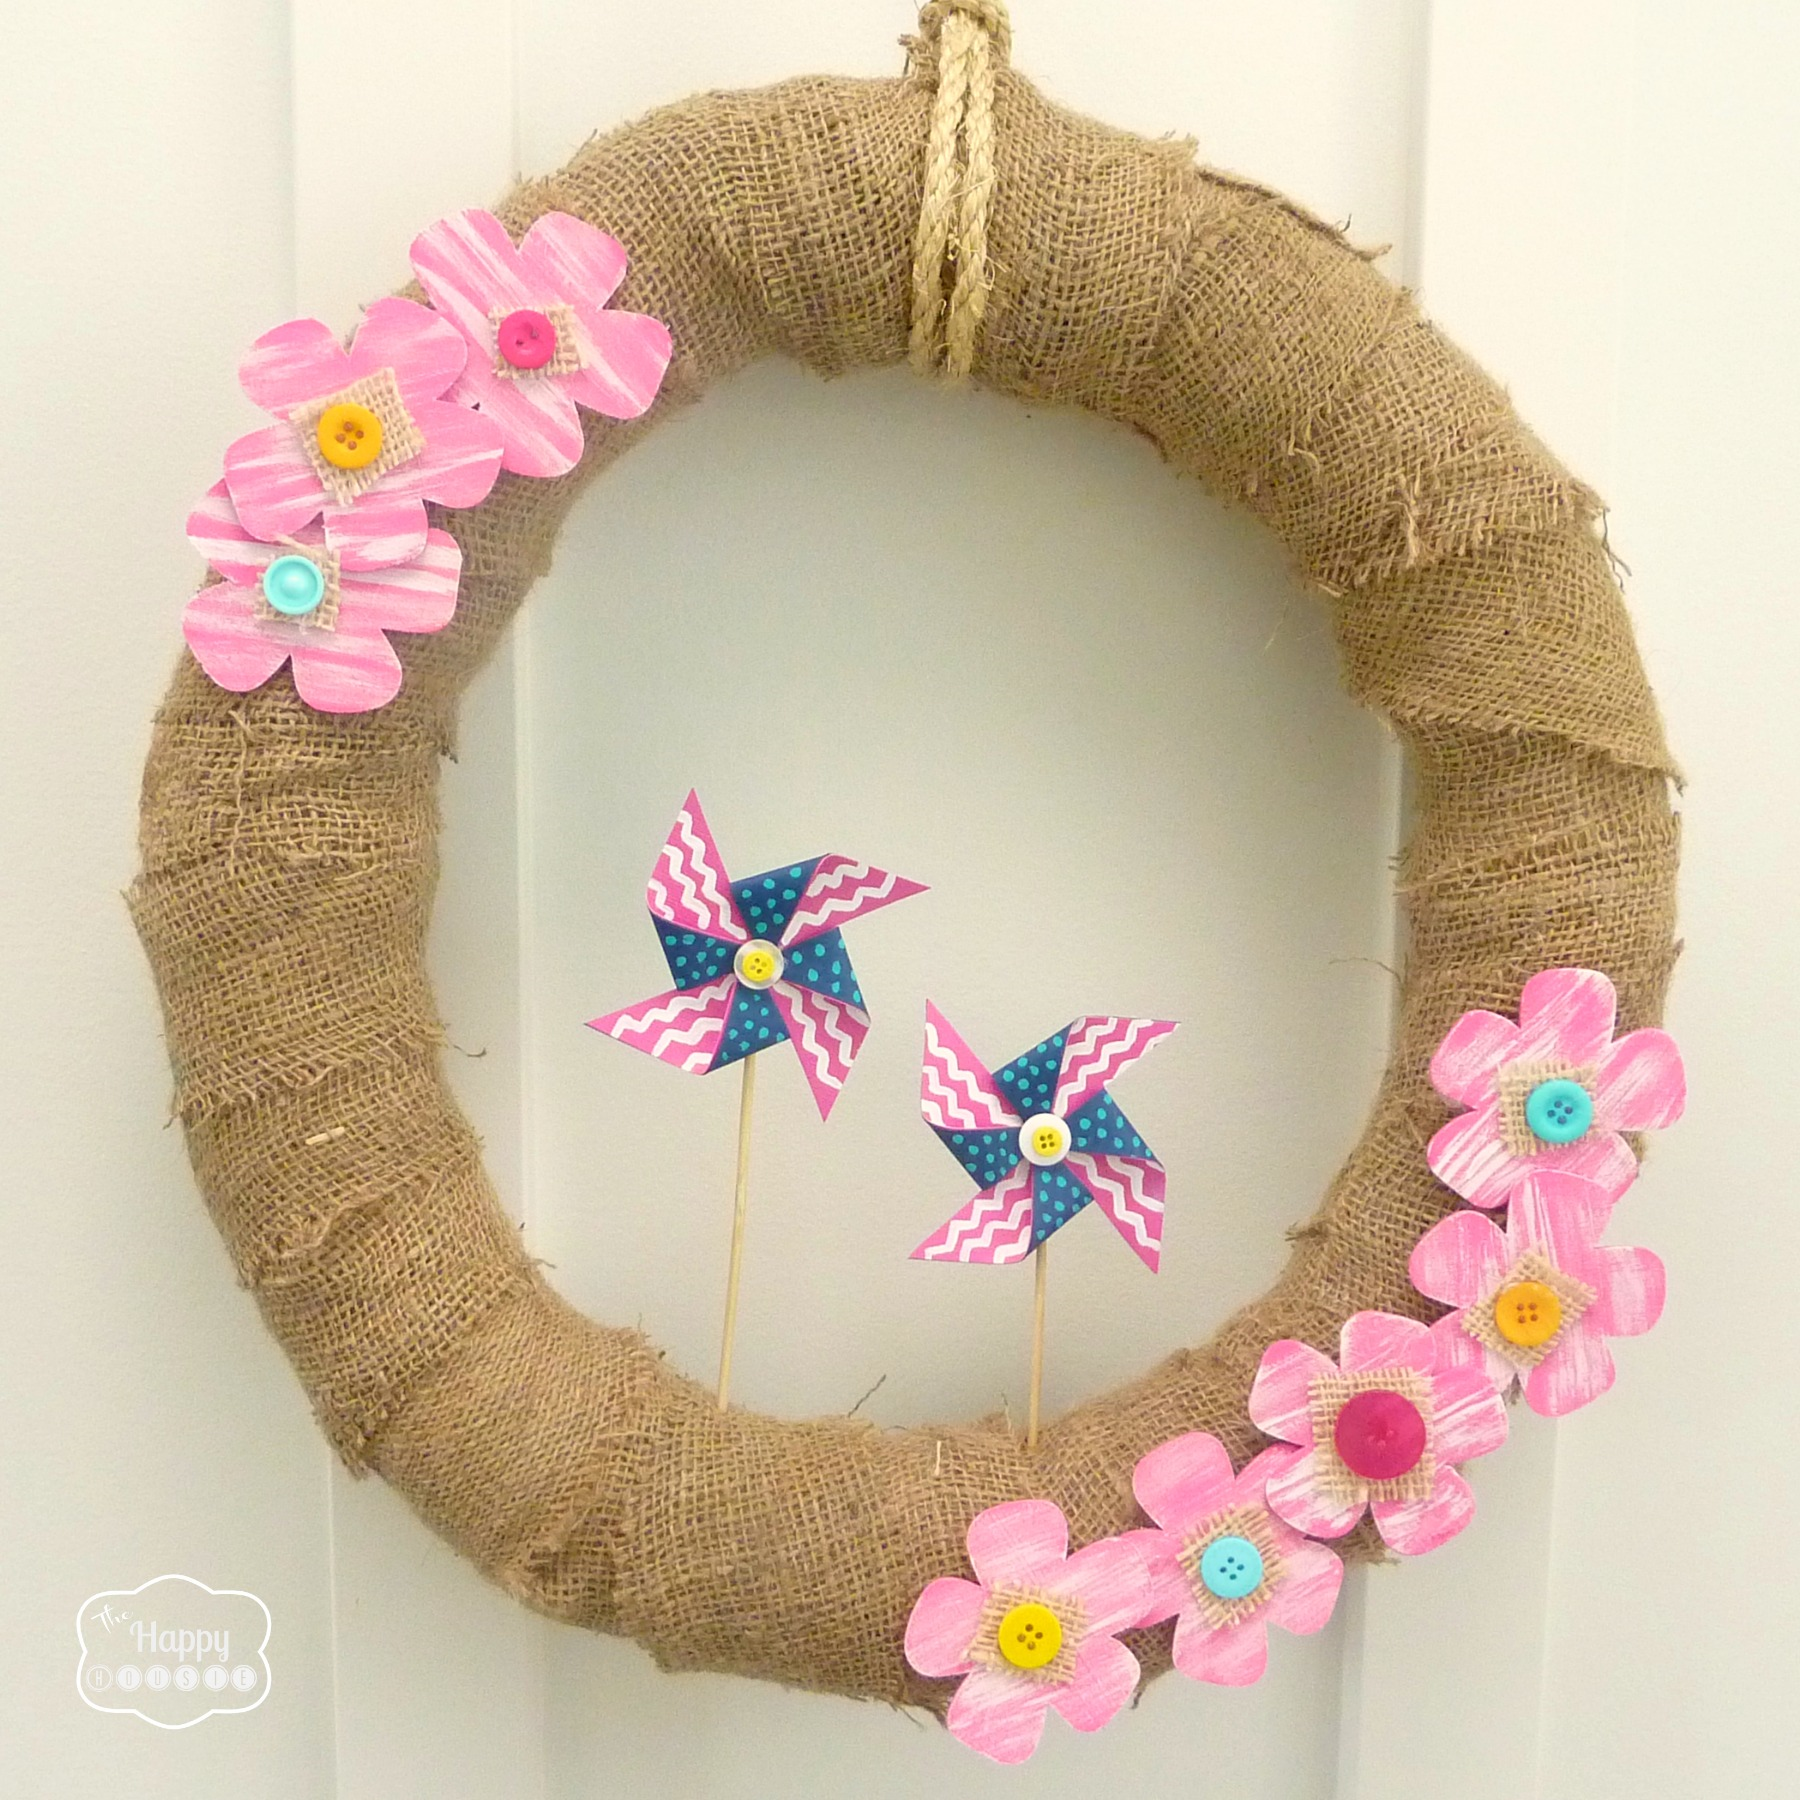 A Burlap and Pinwheel Summer Wreath for our Pink Lemonade Front Porch